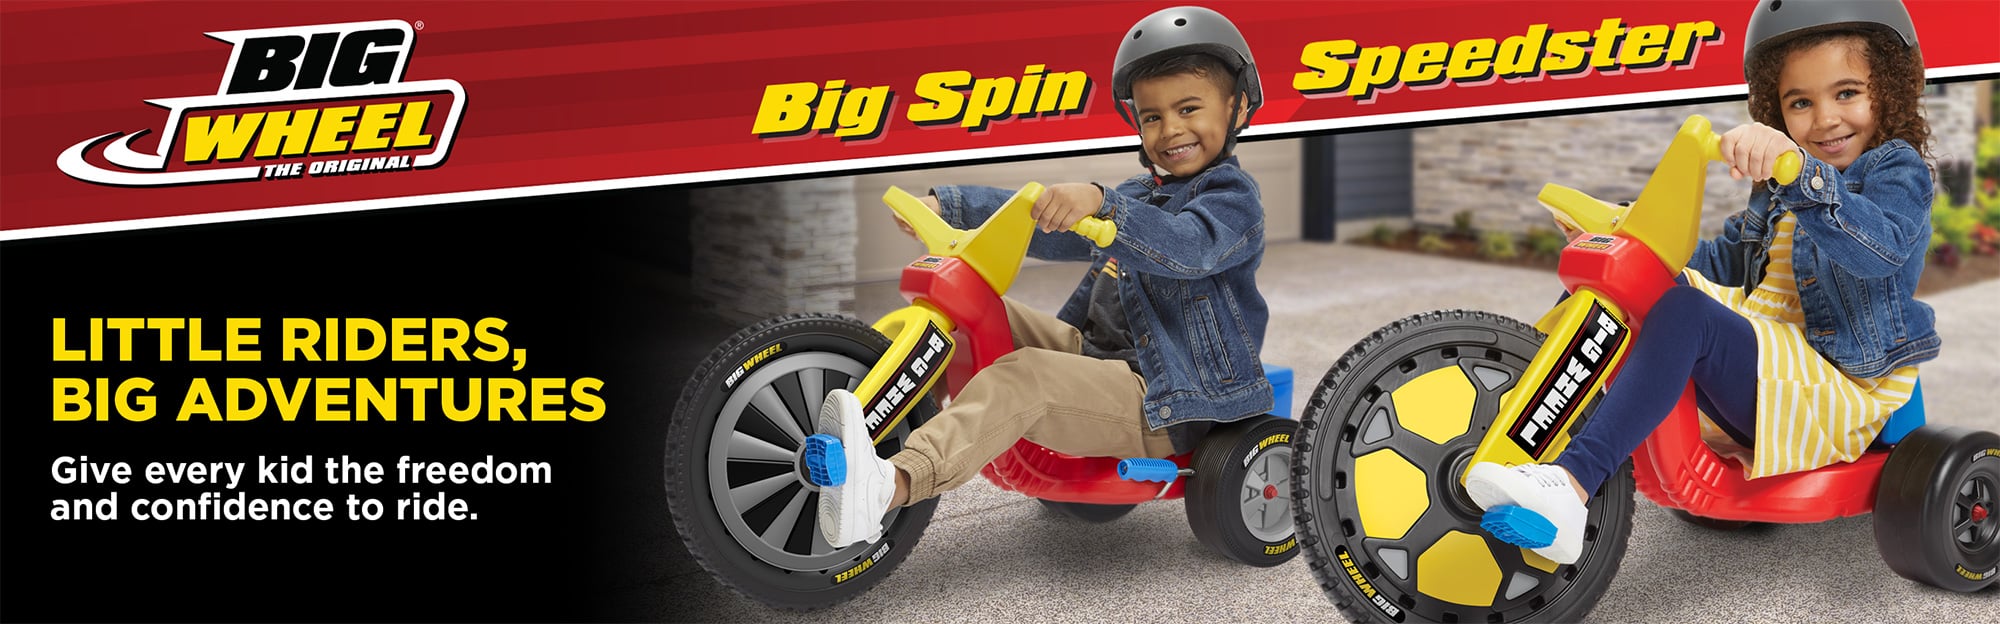 Big Wheel - Little Riders, Big Adventures - Give every kid the freedom and confidence to ride.